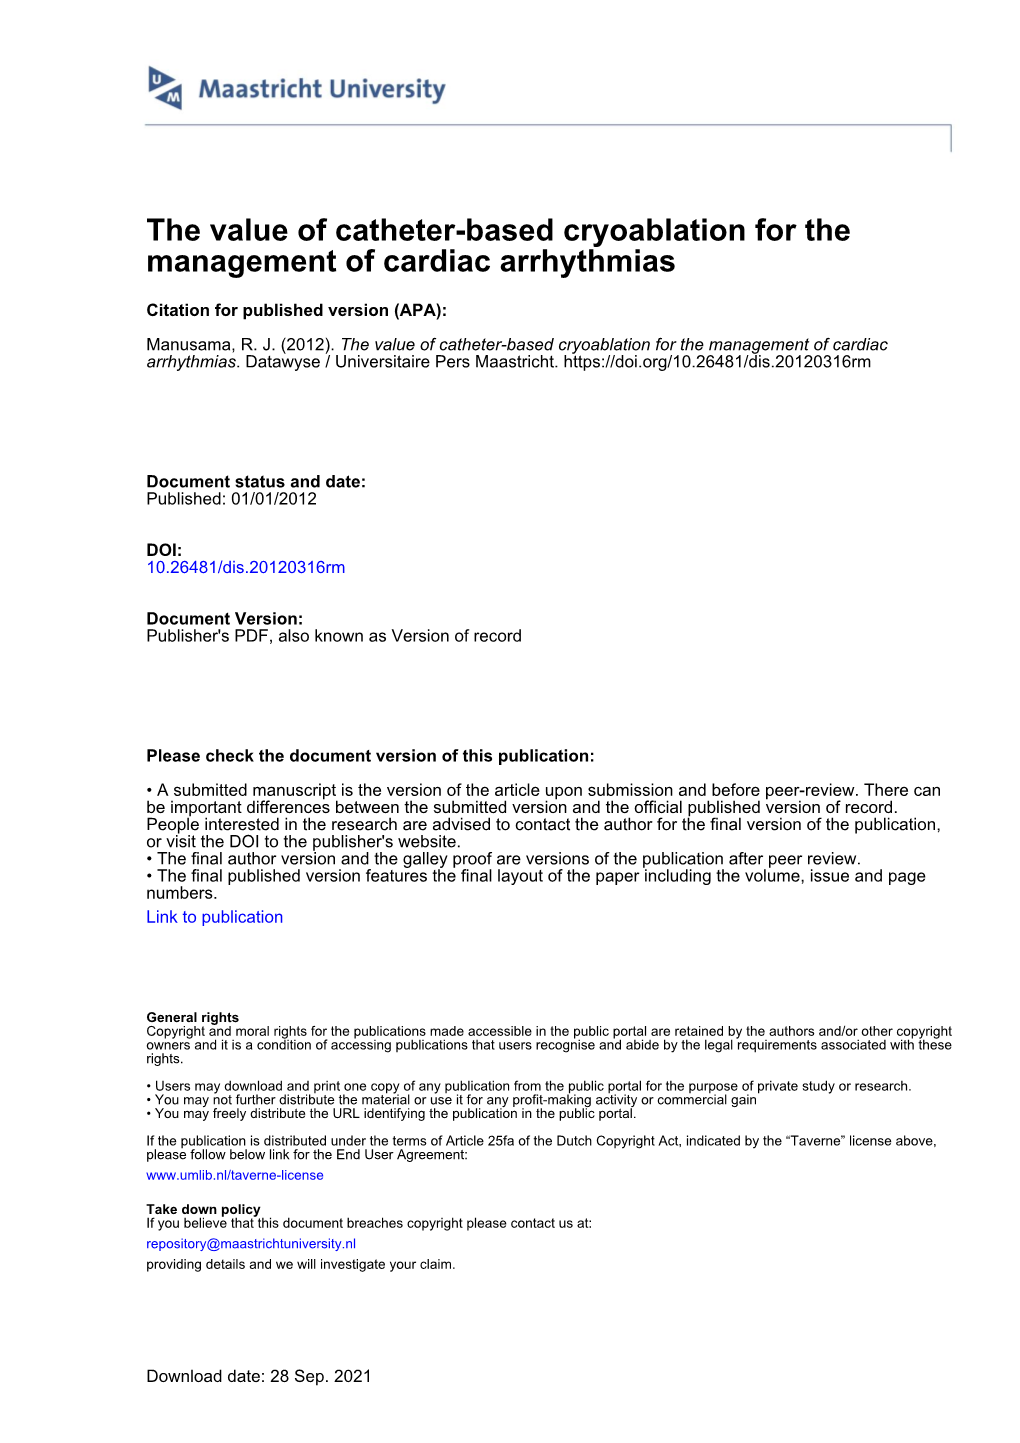 The Value of Catheter-Based Cryoablation for the Management of Cardiac Arrhythmias